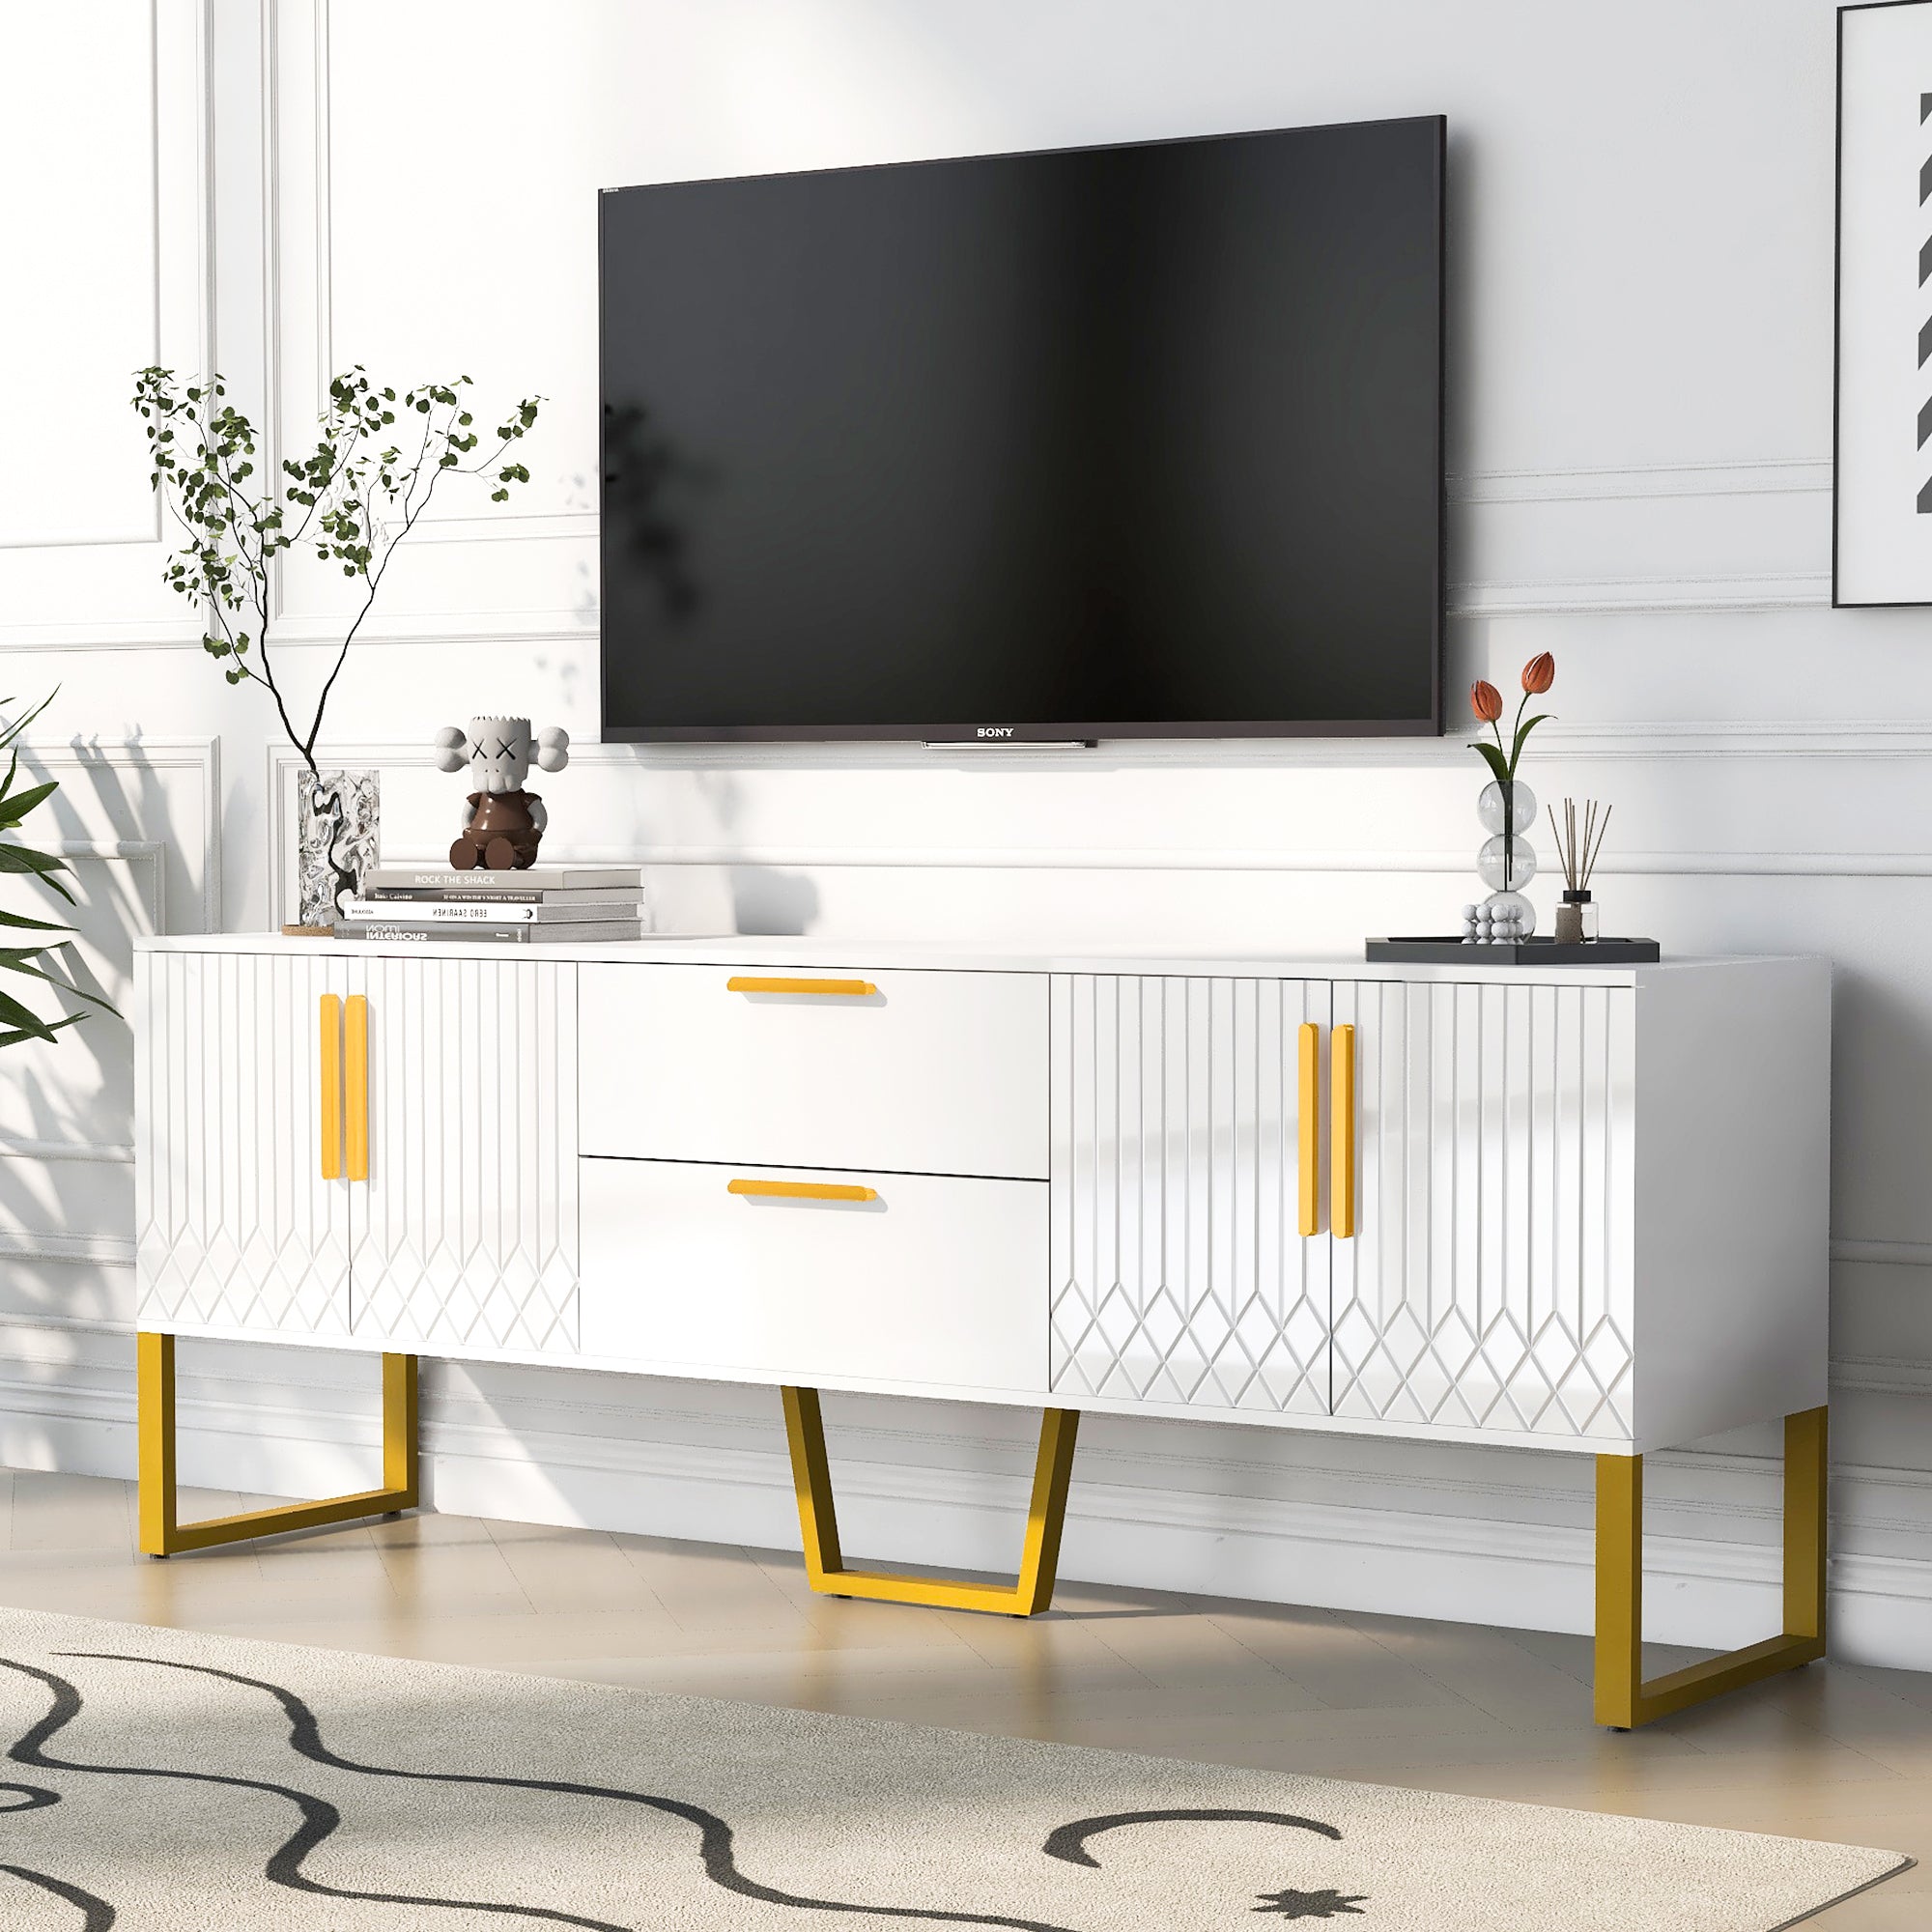 U Can Modern TV Stand for TVs up to 75 Inches, Storage white-mdf